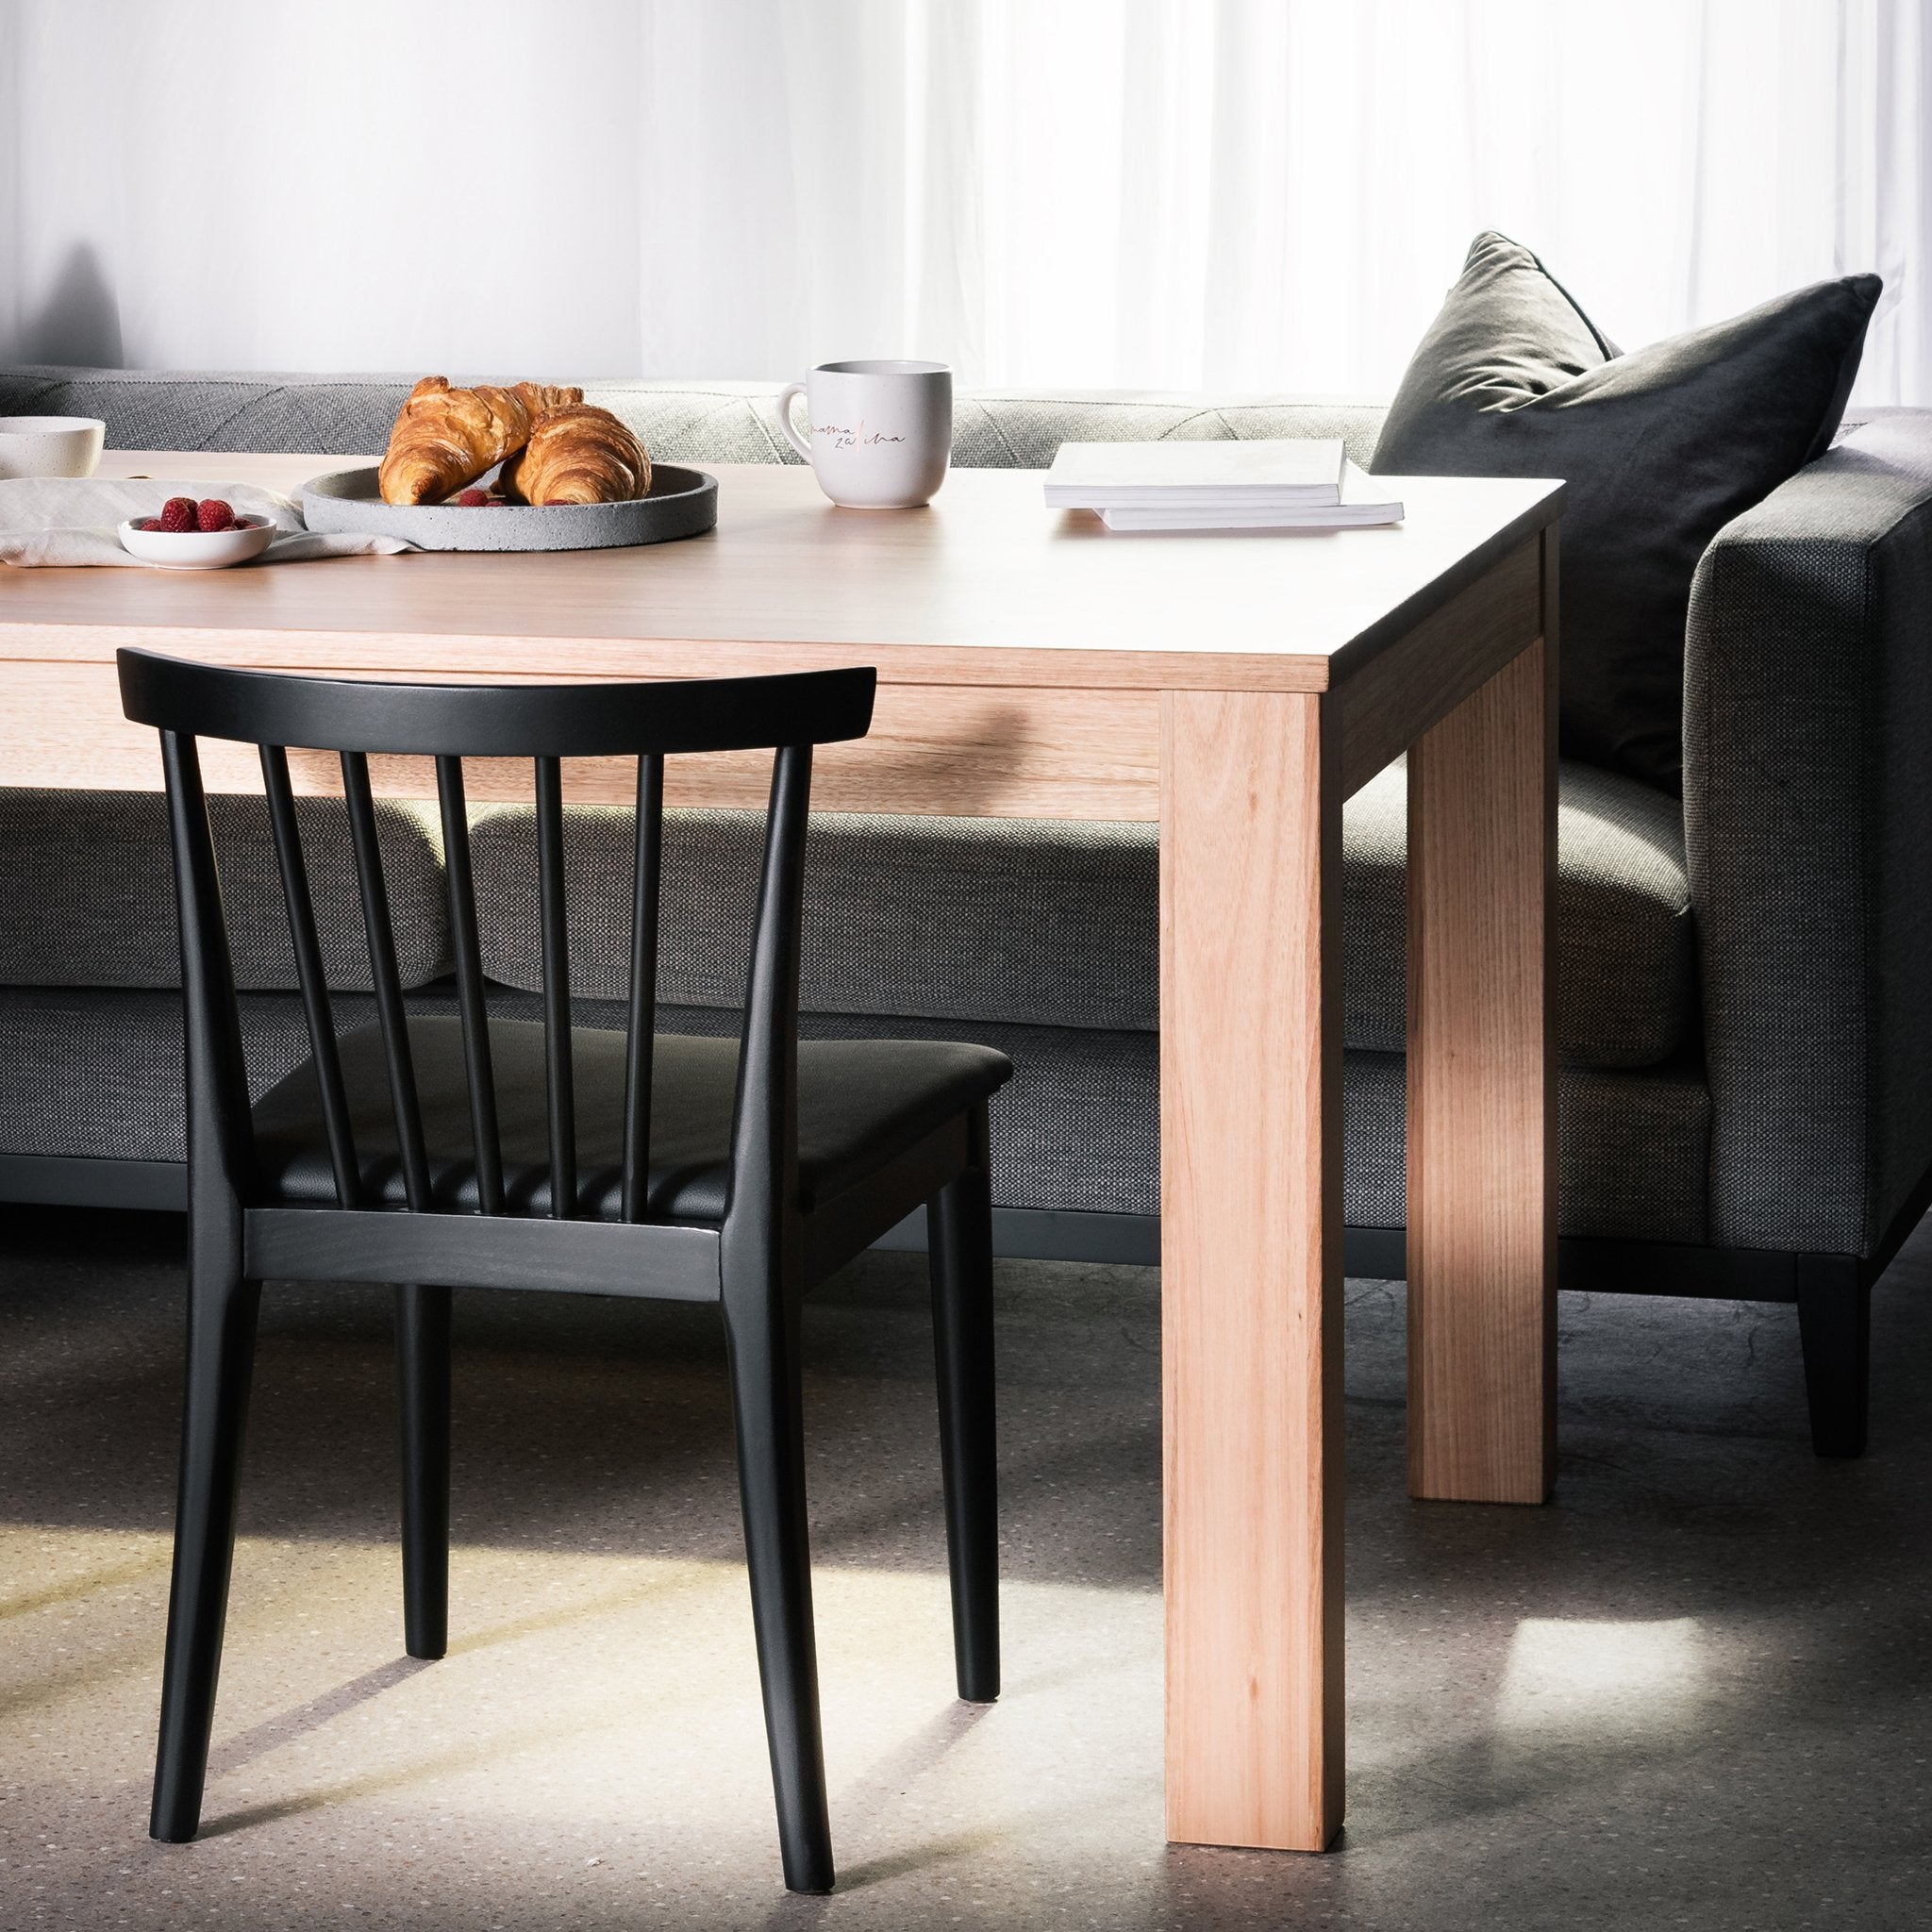 Black Wood Dining Chair / How To Match A Dining Table With The Right